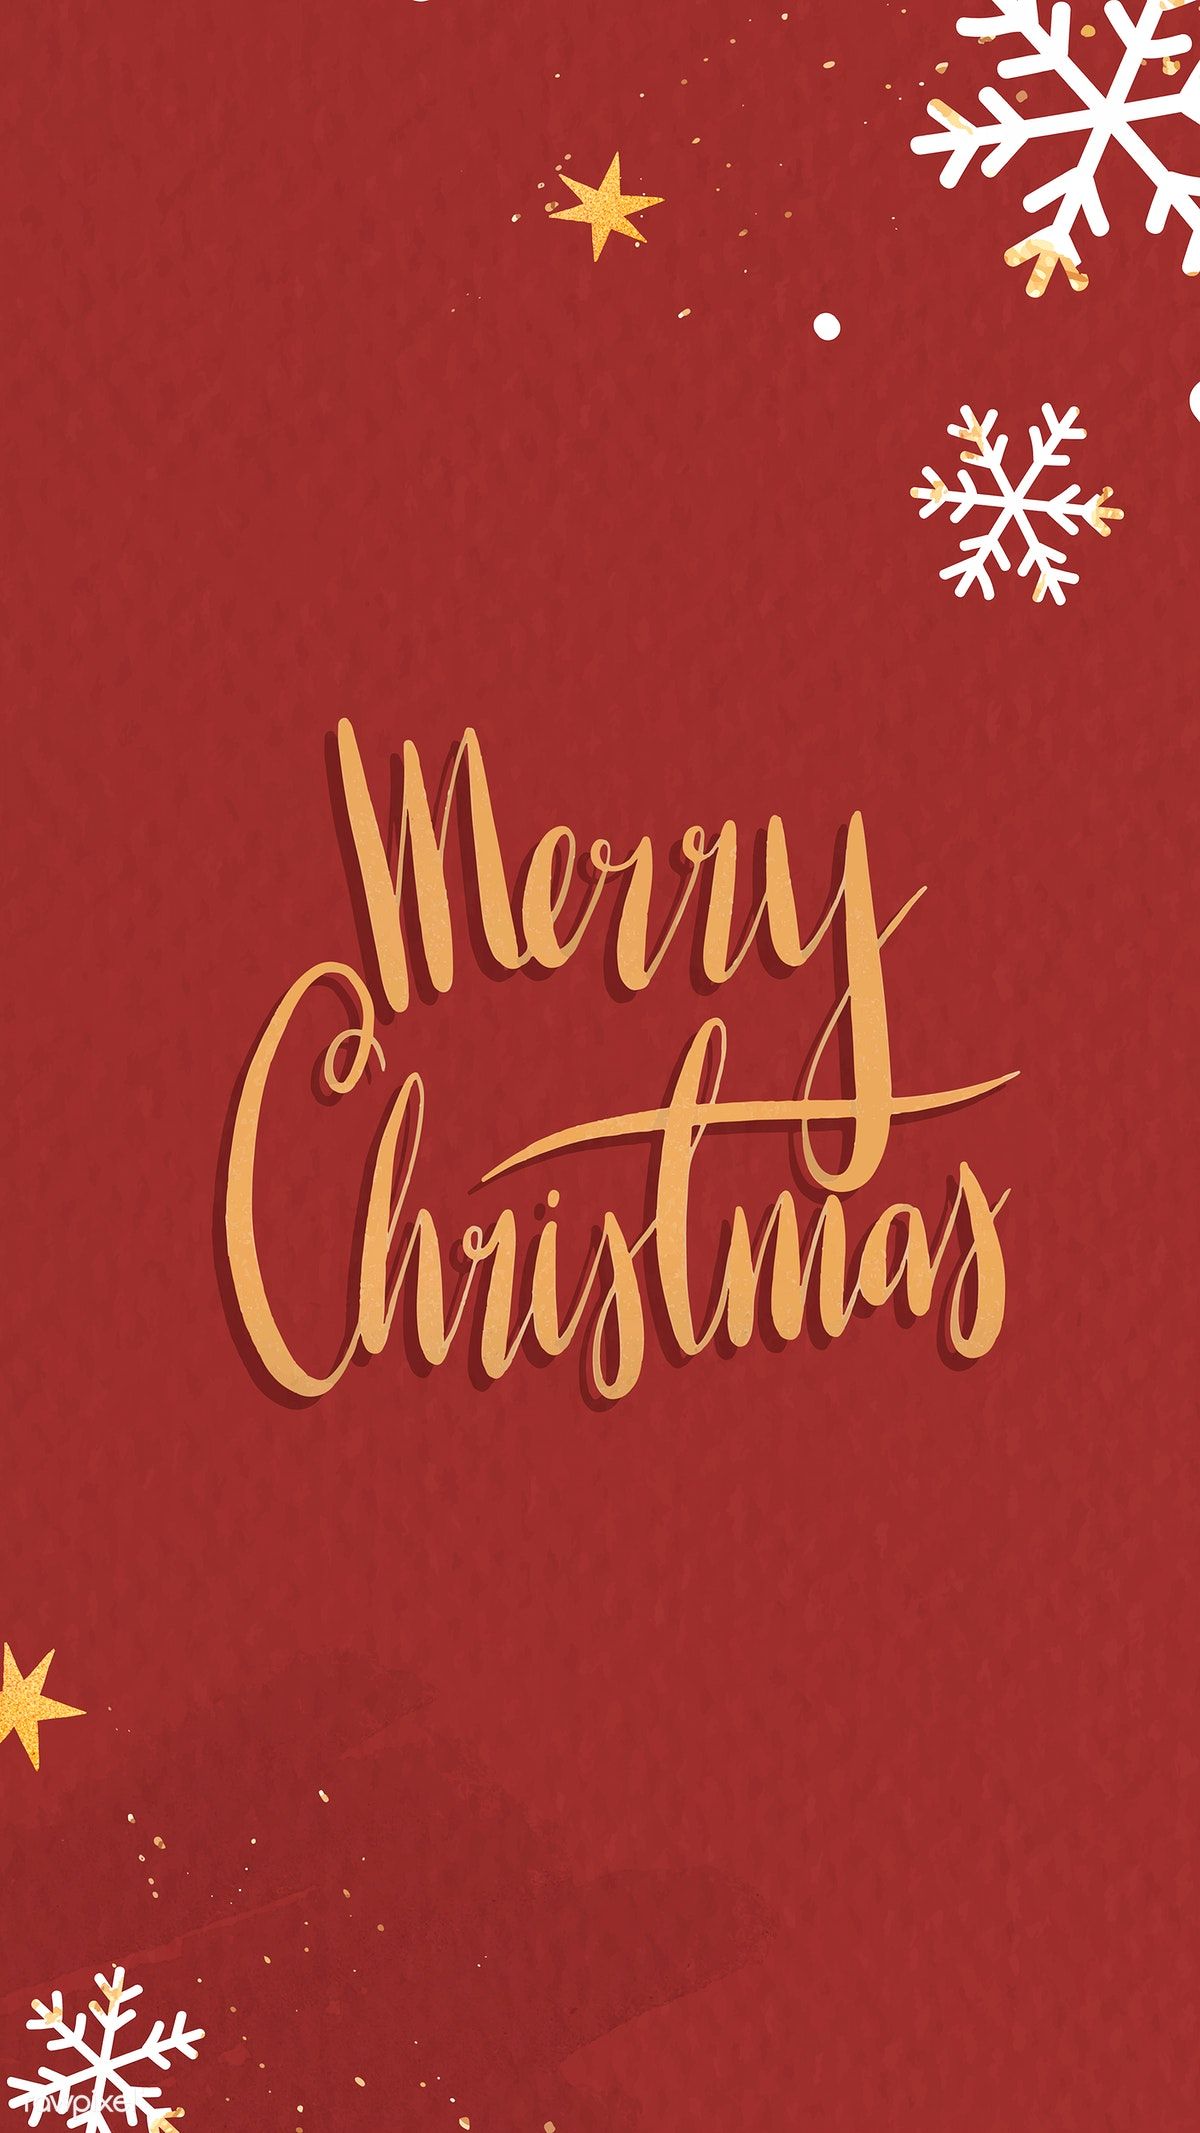 Gold merry christmas on red mobile phone wallpaper vector premium image by raâ merry christmas wallpaper wallpaper iphone christmas merry christmas background